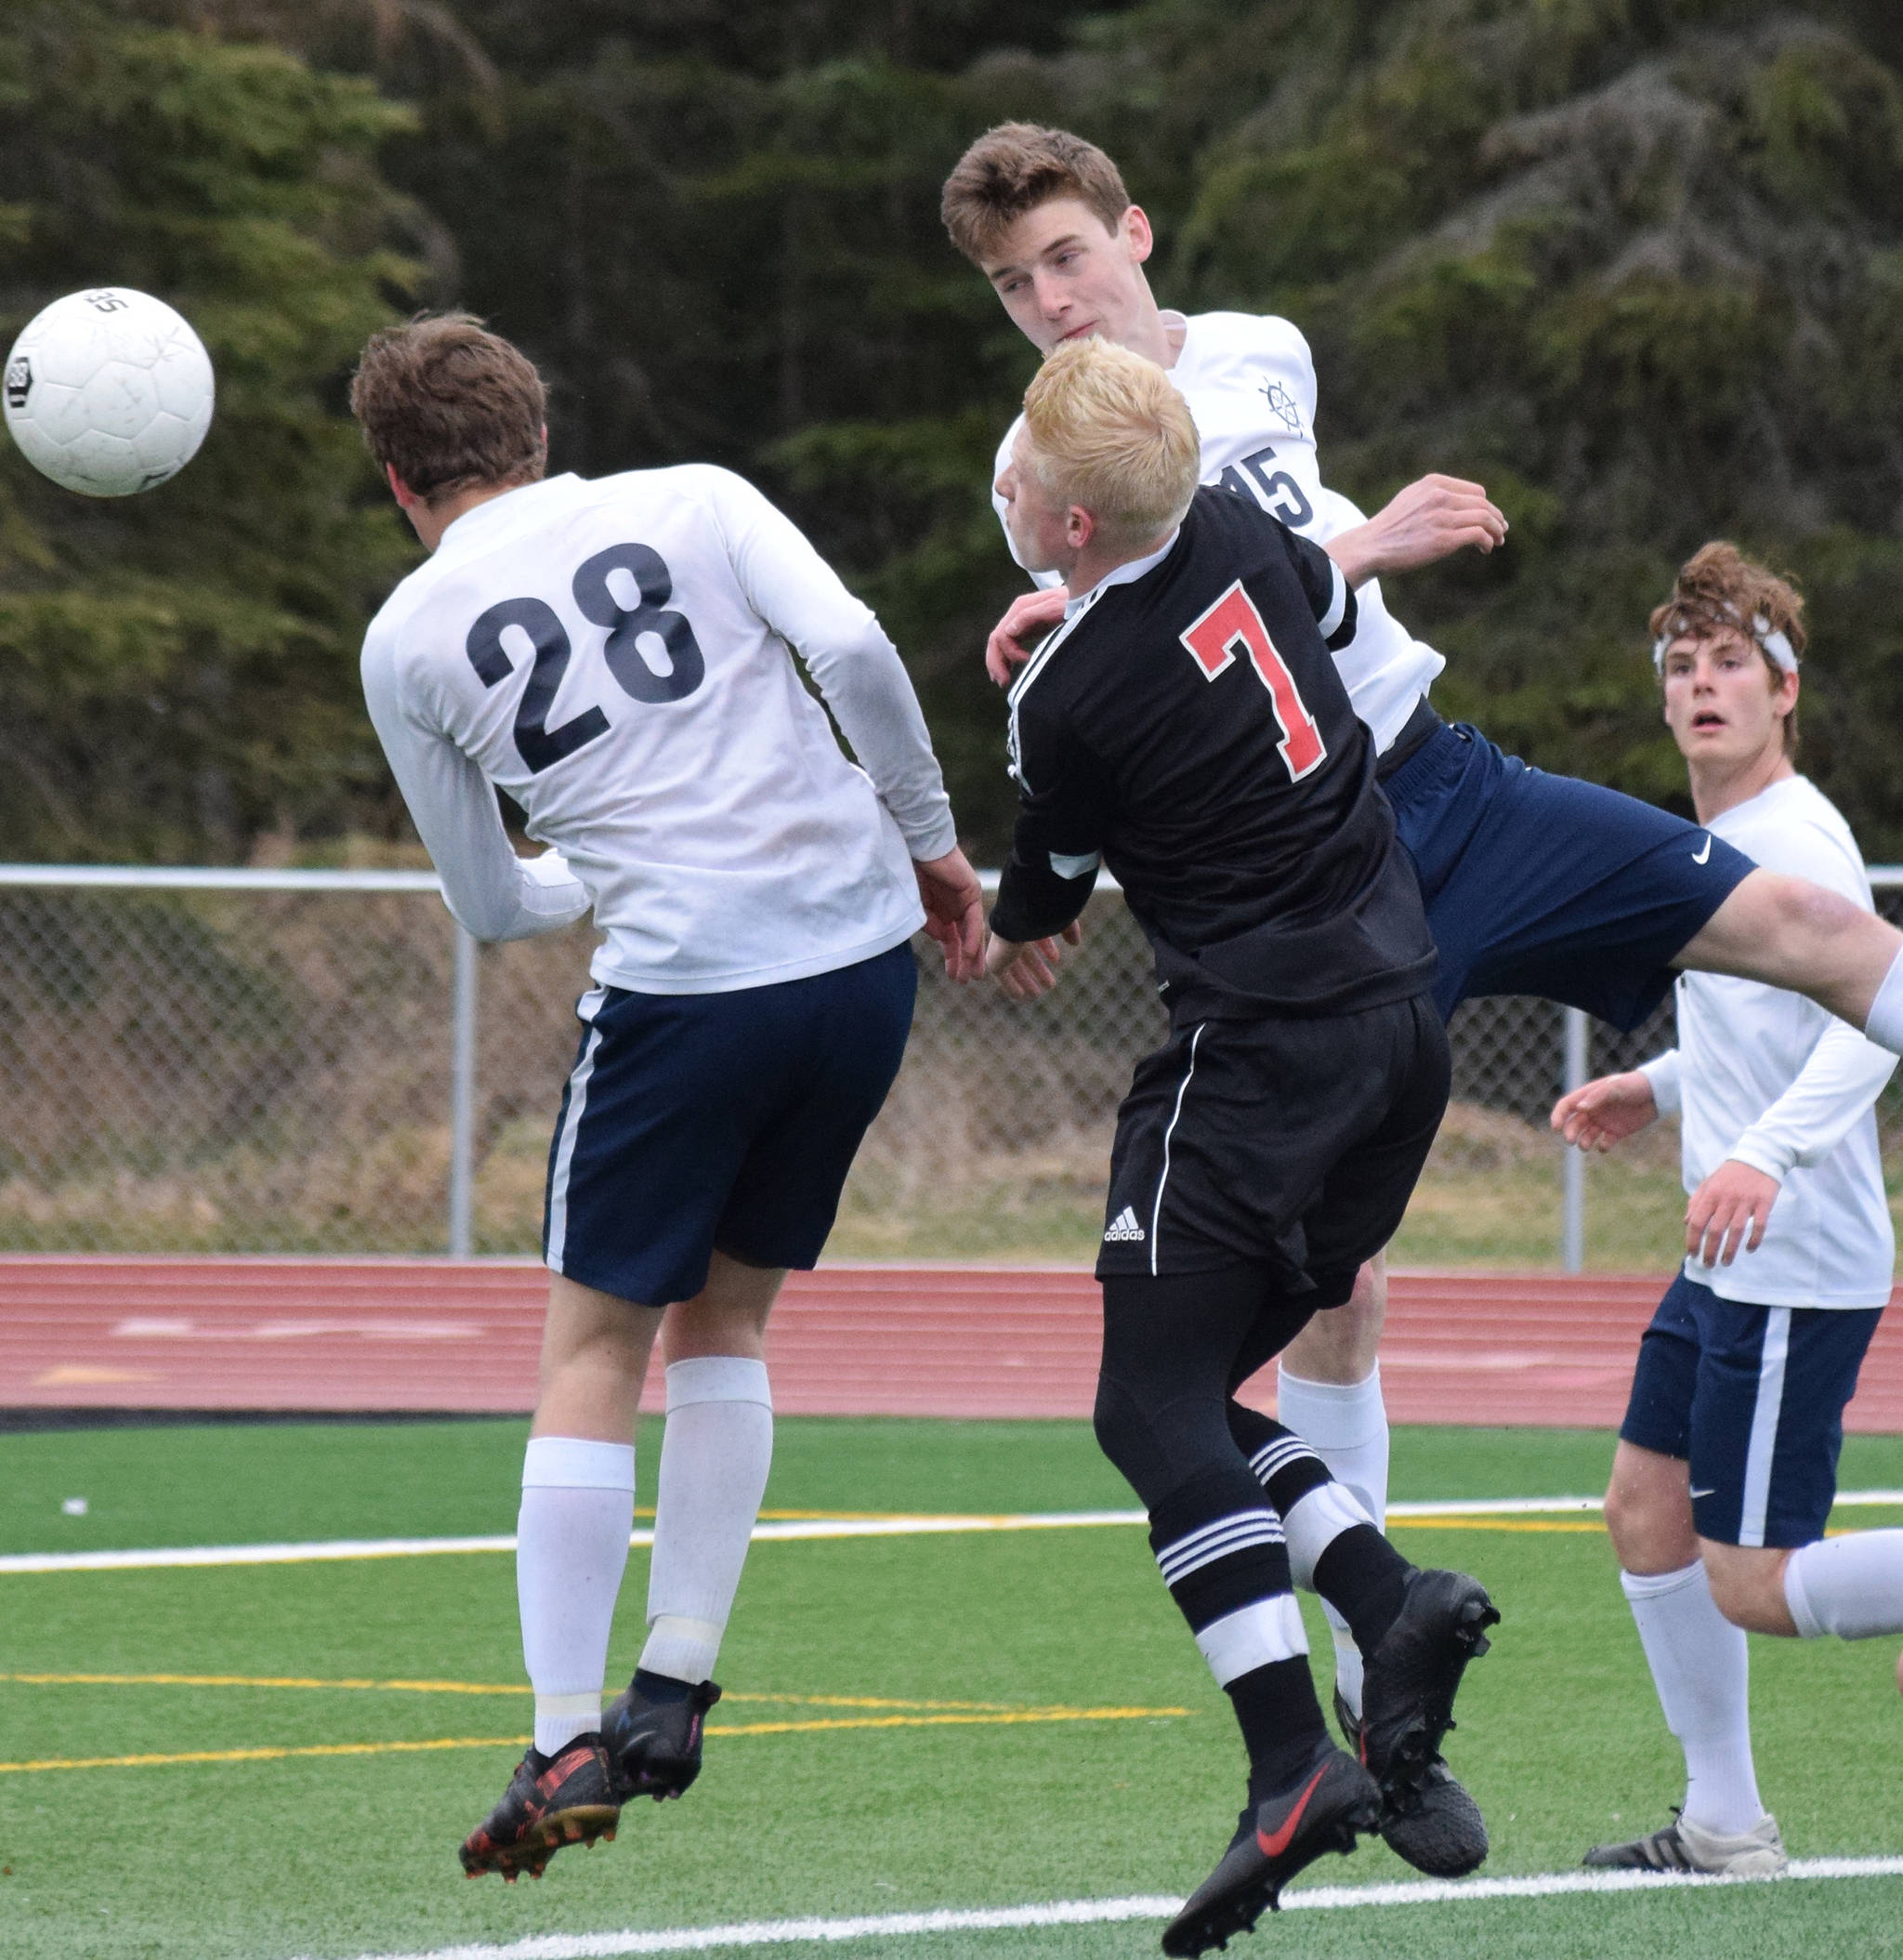 Kenai’s Leif Lofquist (7) gets sandwiched between Homer’s Phinny Weston (28) and Ethan Pitzman Thursday, May 9, 2019, in Kenai, Alaska. (Photo by Joey Klecka/Peninsula Clarion)